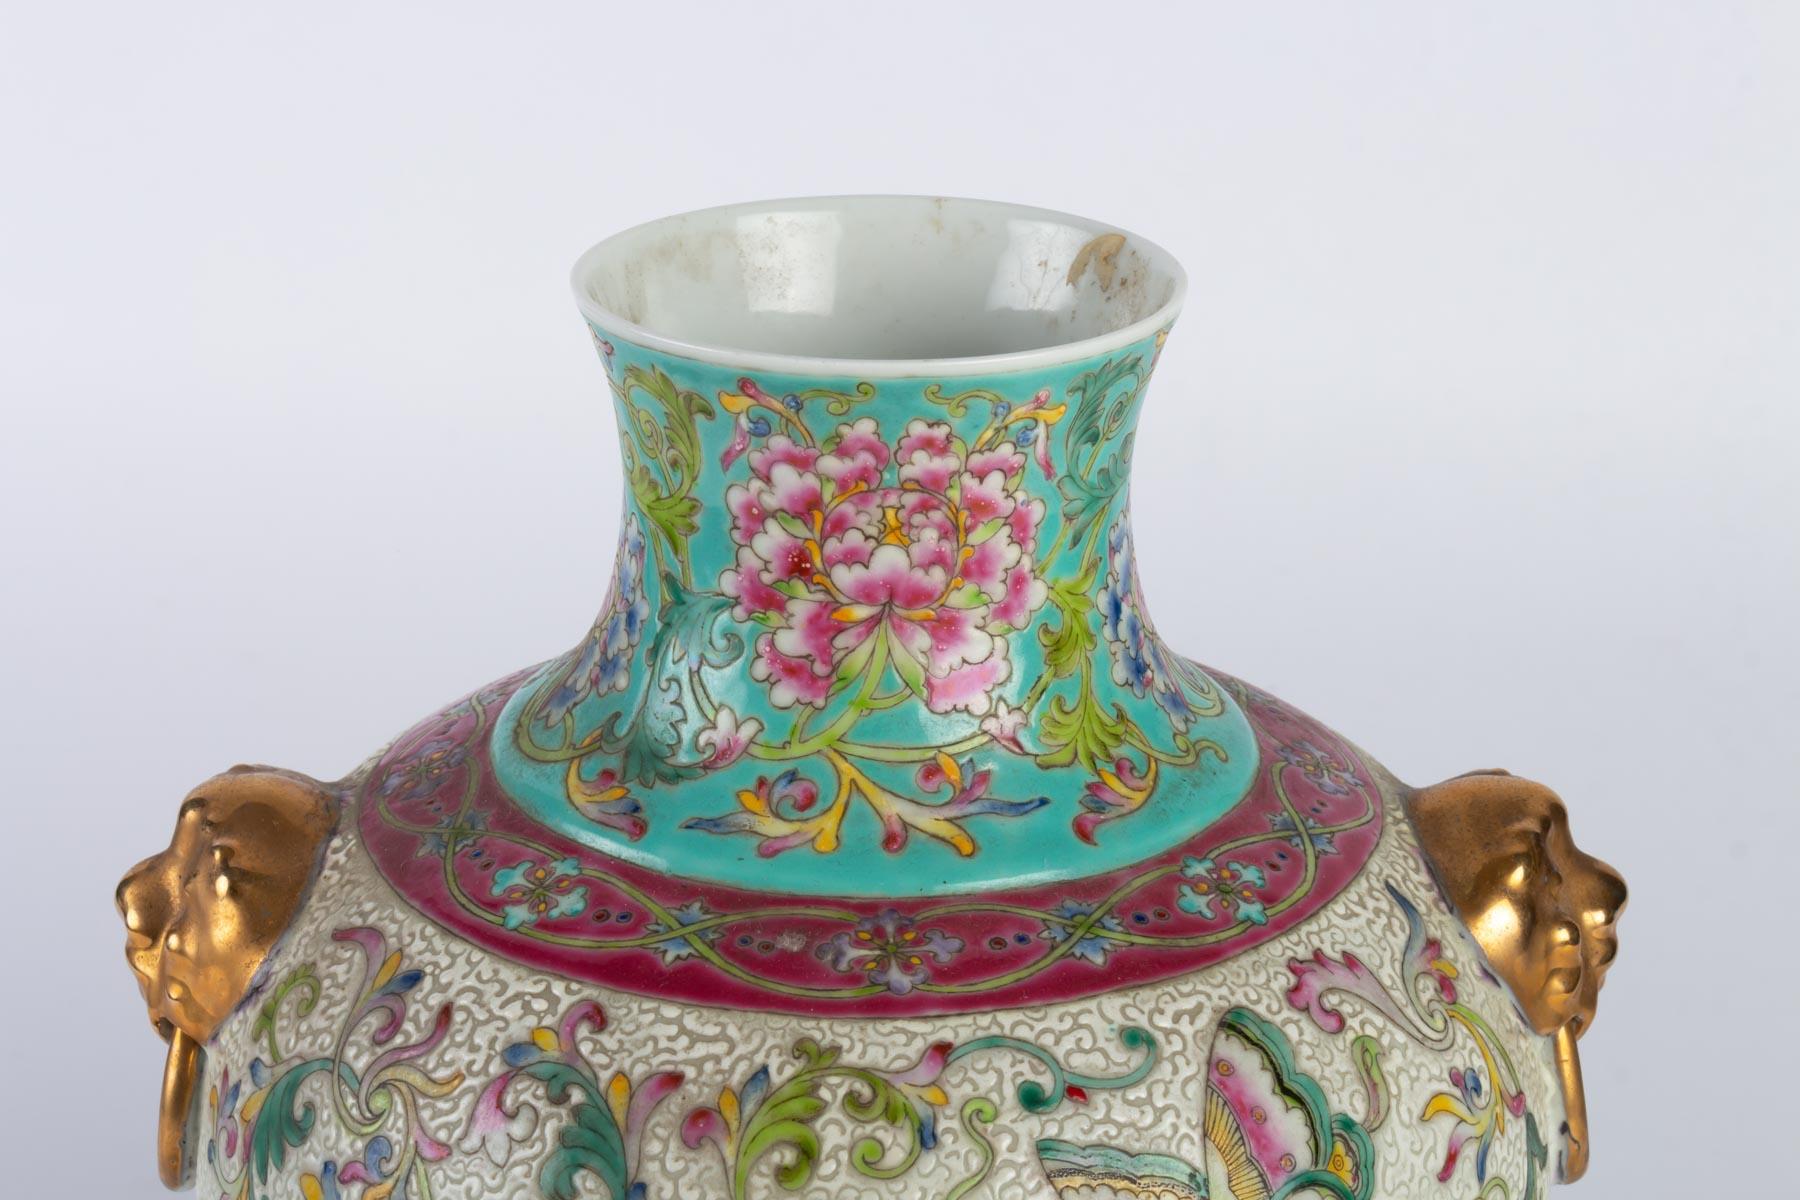 Chinese Export Porcelain Vase Decorated with Floral Scrolls